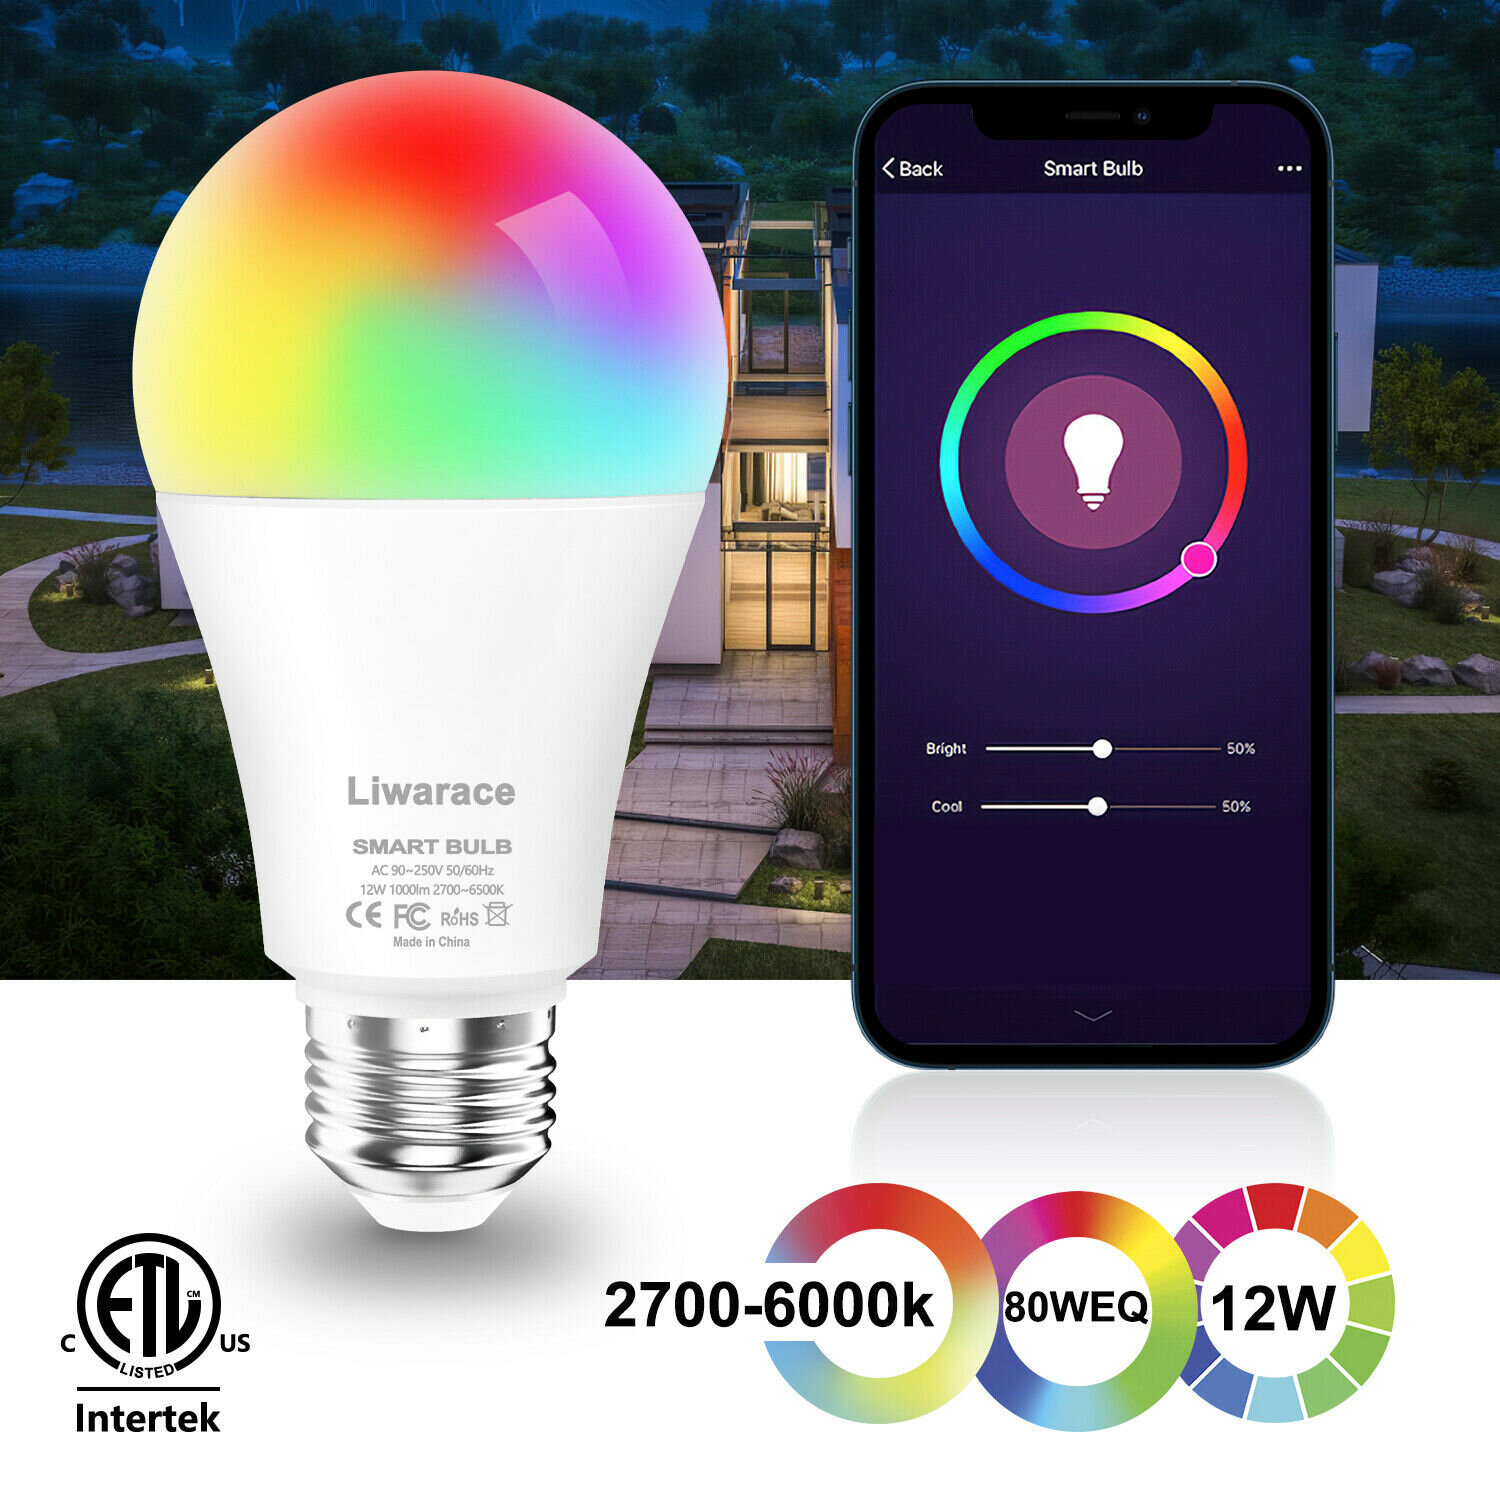 WiFi RGB Smart LED Light Bulb for Apps by iOS Android Amazon Alexa Google Home 